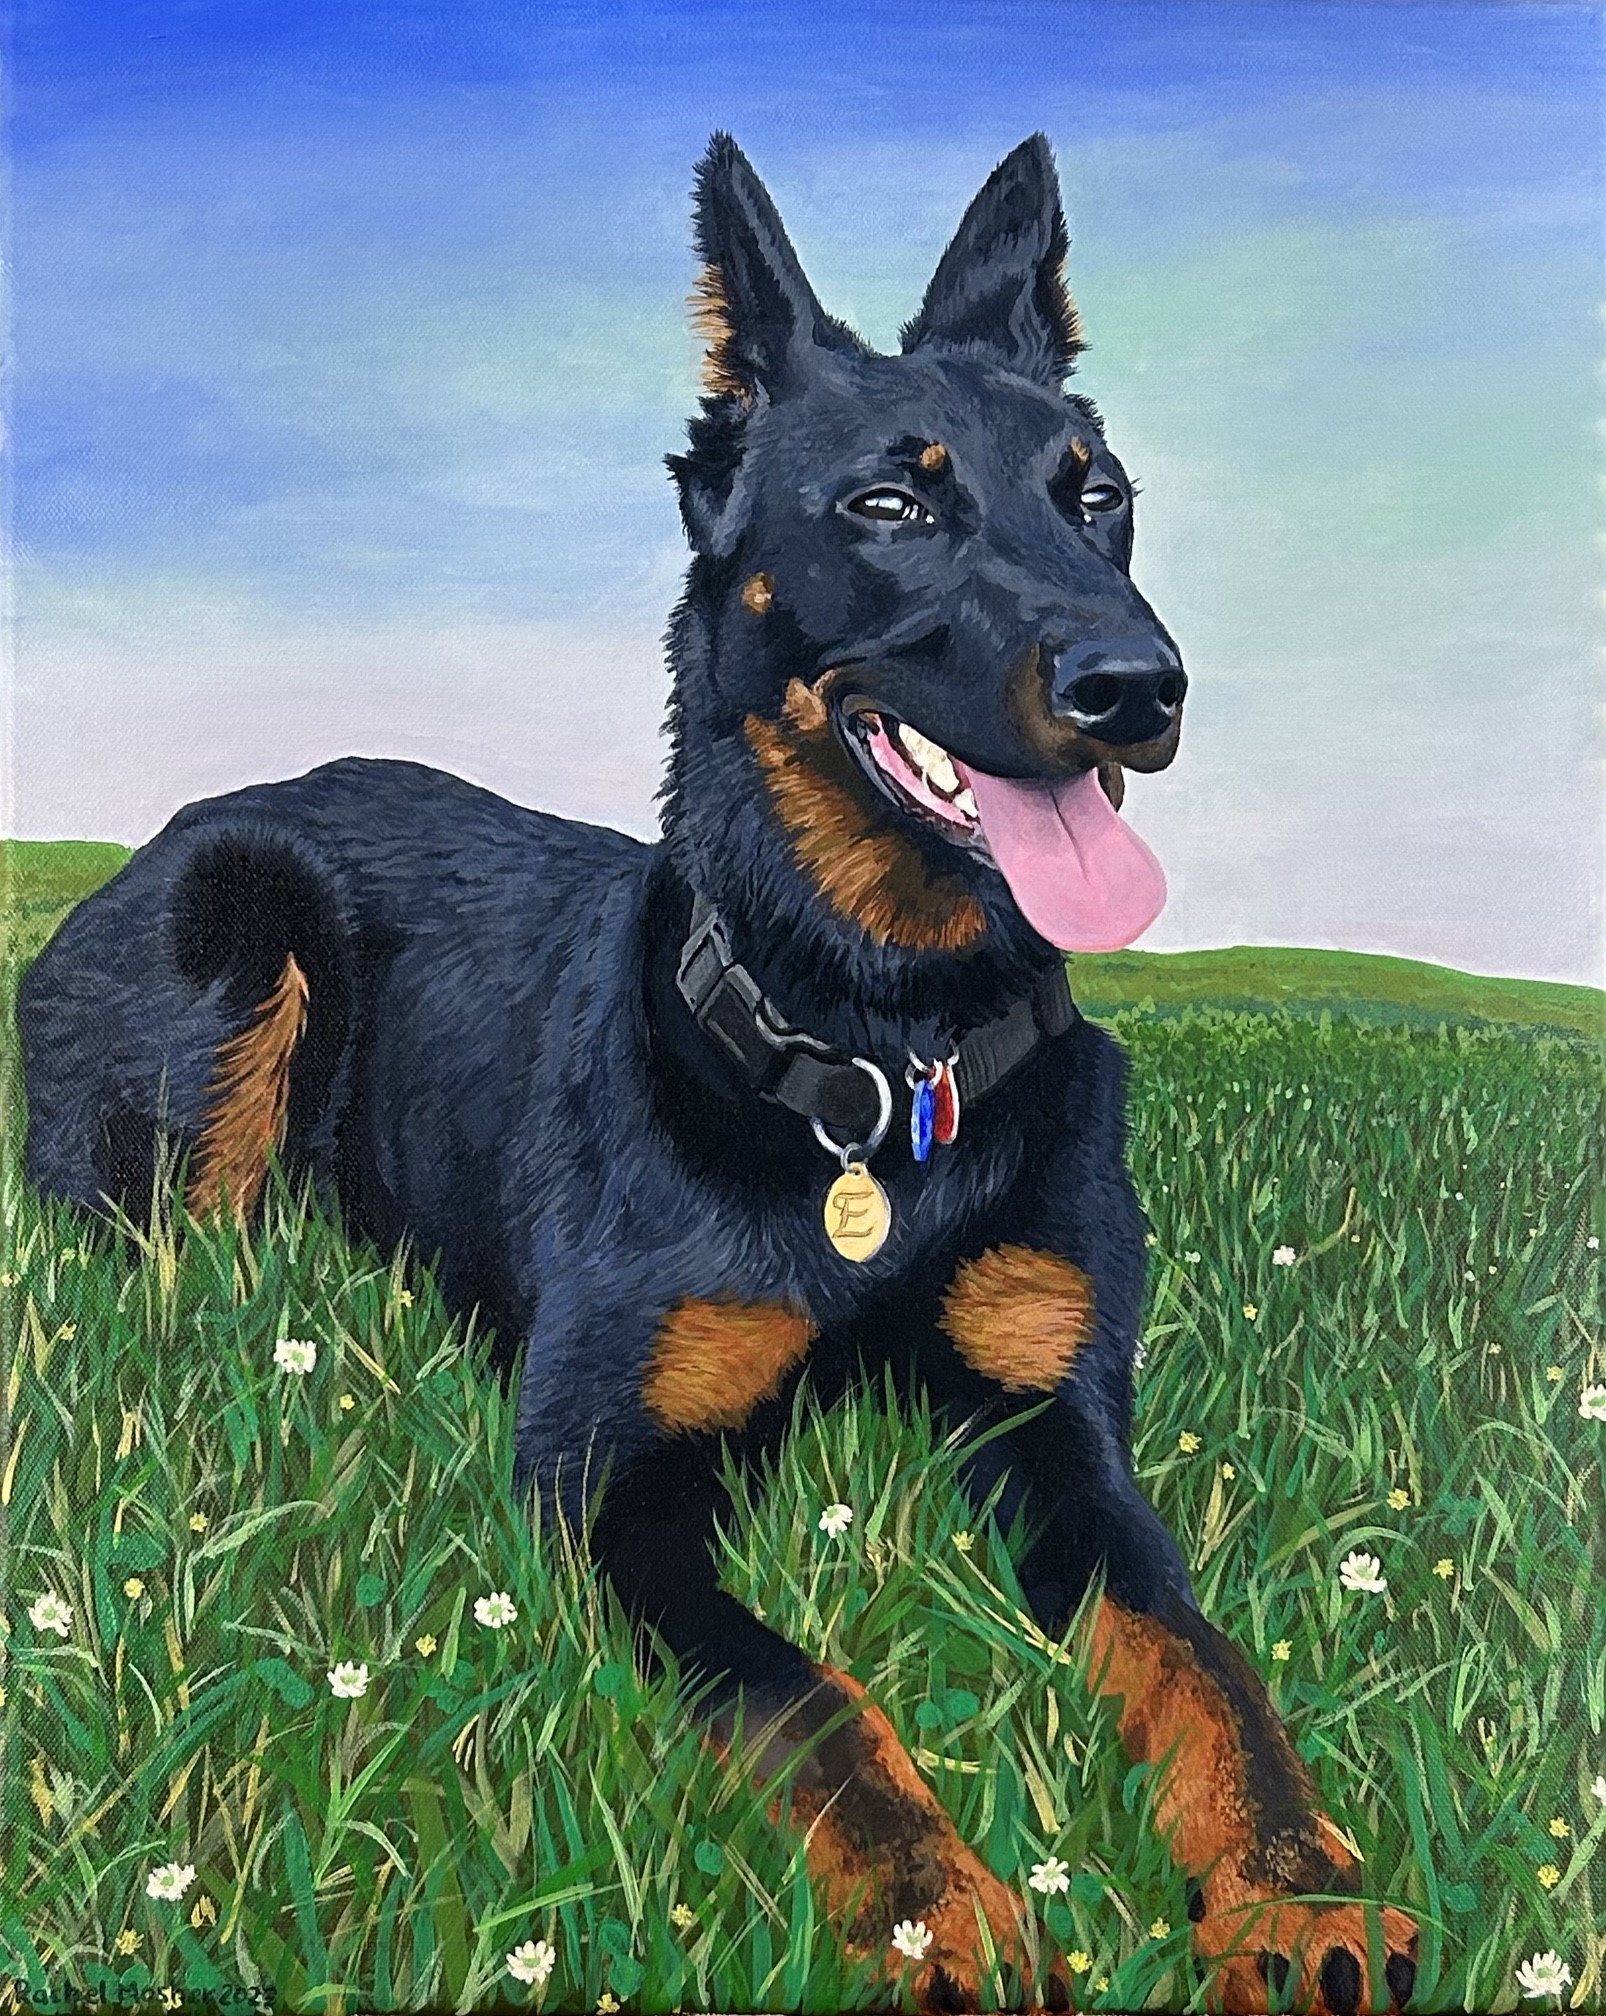 Painting of black and brown dog with its tongue out wearing a collar and laying in green grass with little white flowers and blue sky behind it